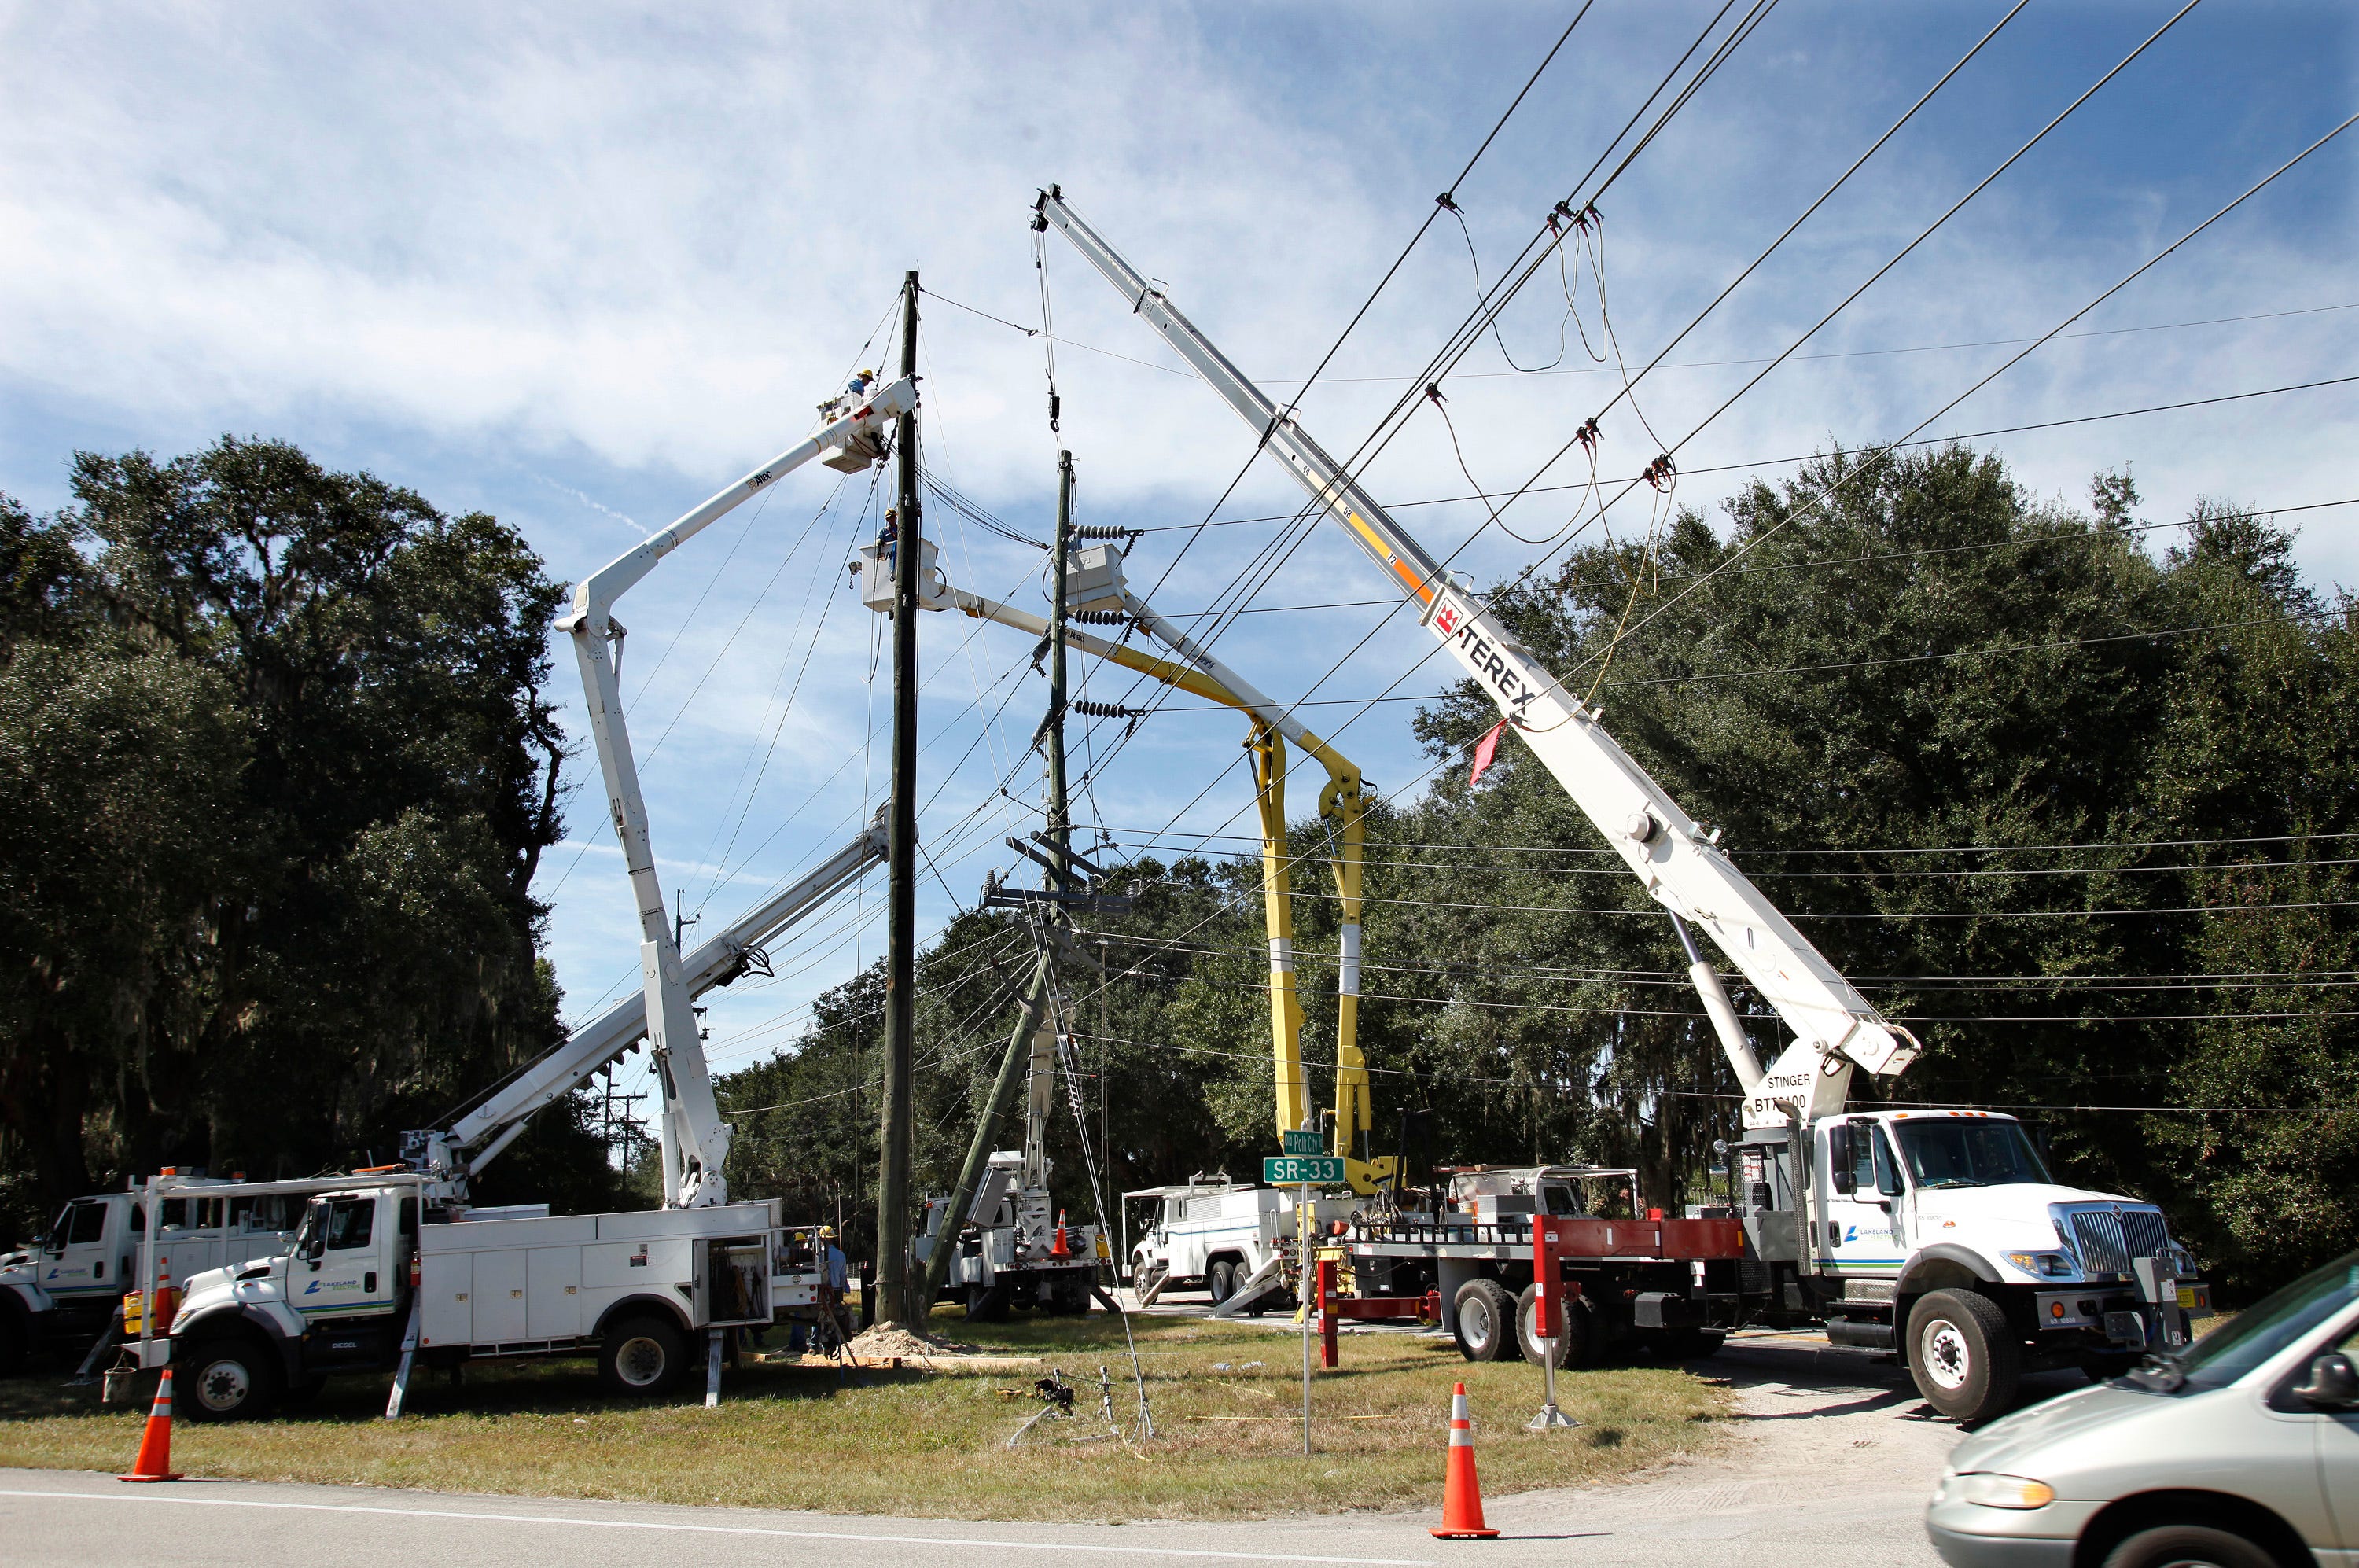 Duke Energy has said it needs to increase rates in order to strengthen the electric grid, improve reliability and prepare for more renewable energy.